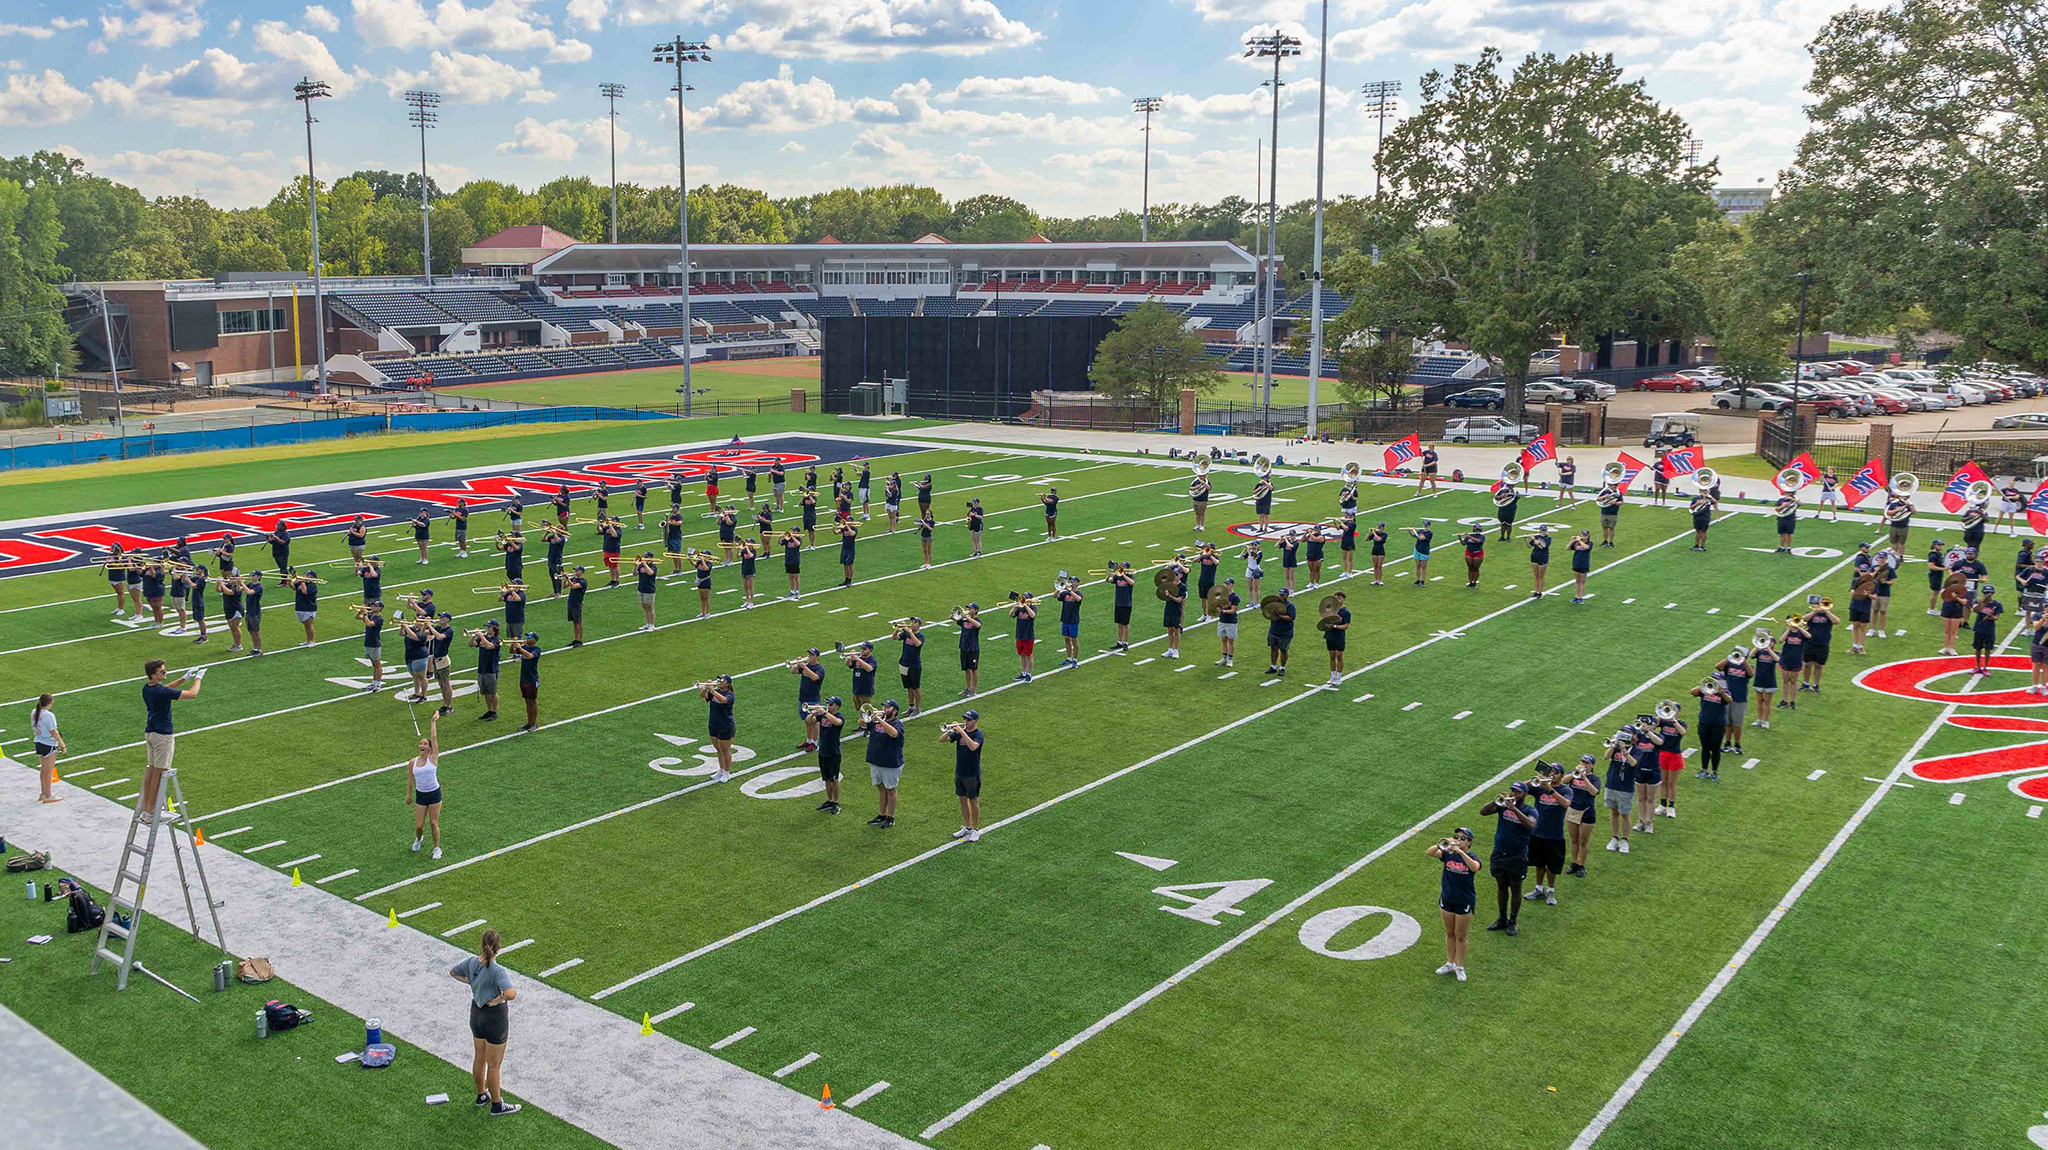 The Pride of the South marching band practices Tuesday (Aug. 29) on its new practice field, which is a replica of Hollingsworth Field at Vaught-Hemingway Stadium. The band members say their performances will be better prepared and polished during this football season because of the upgraded facility. Photo by Amy Howell/University Development